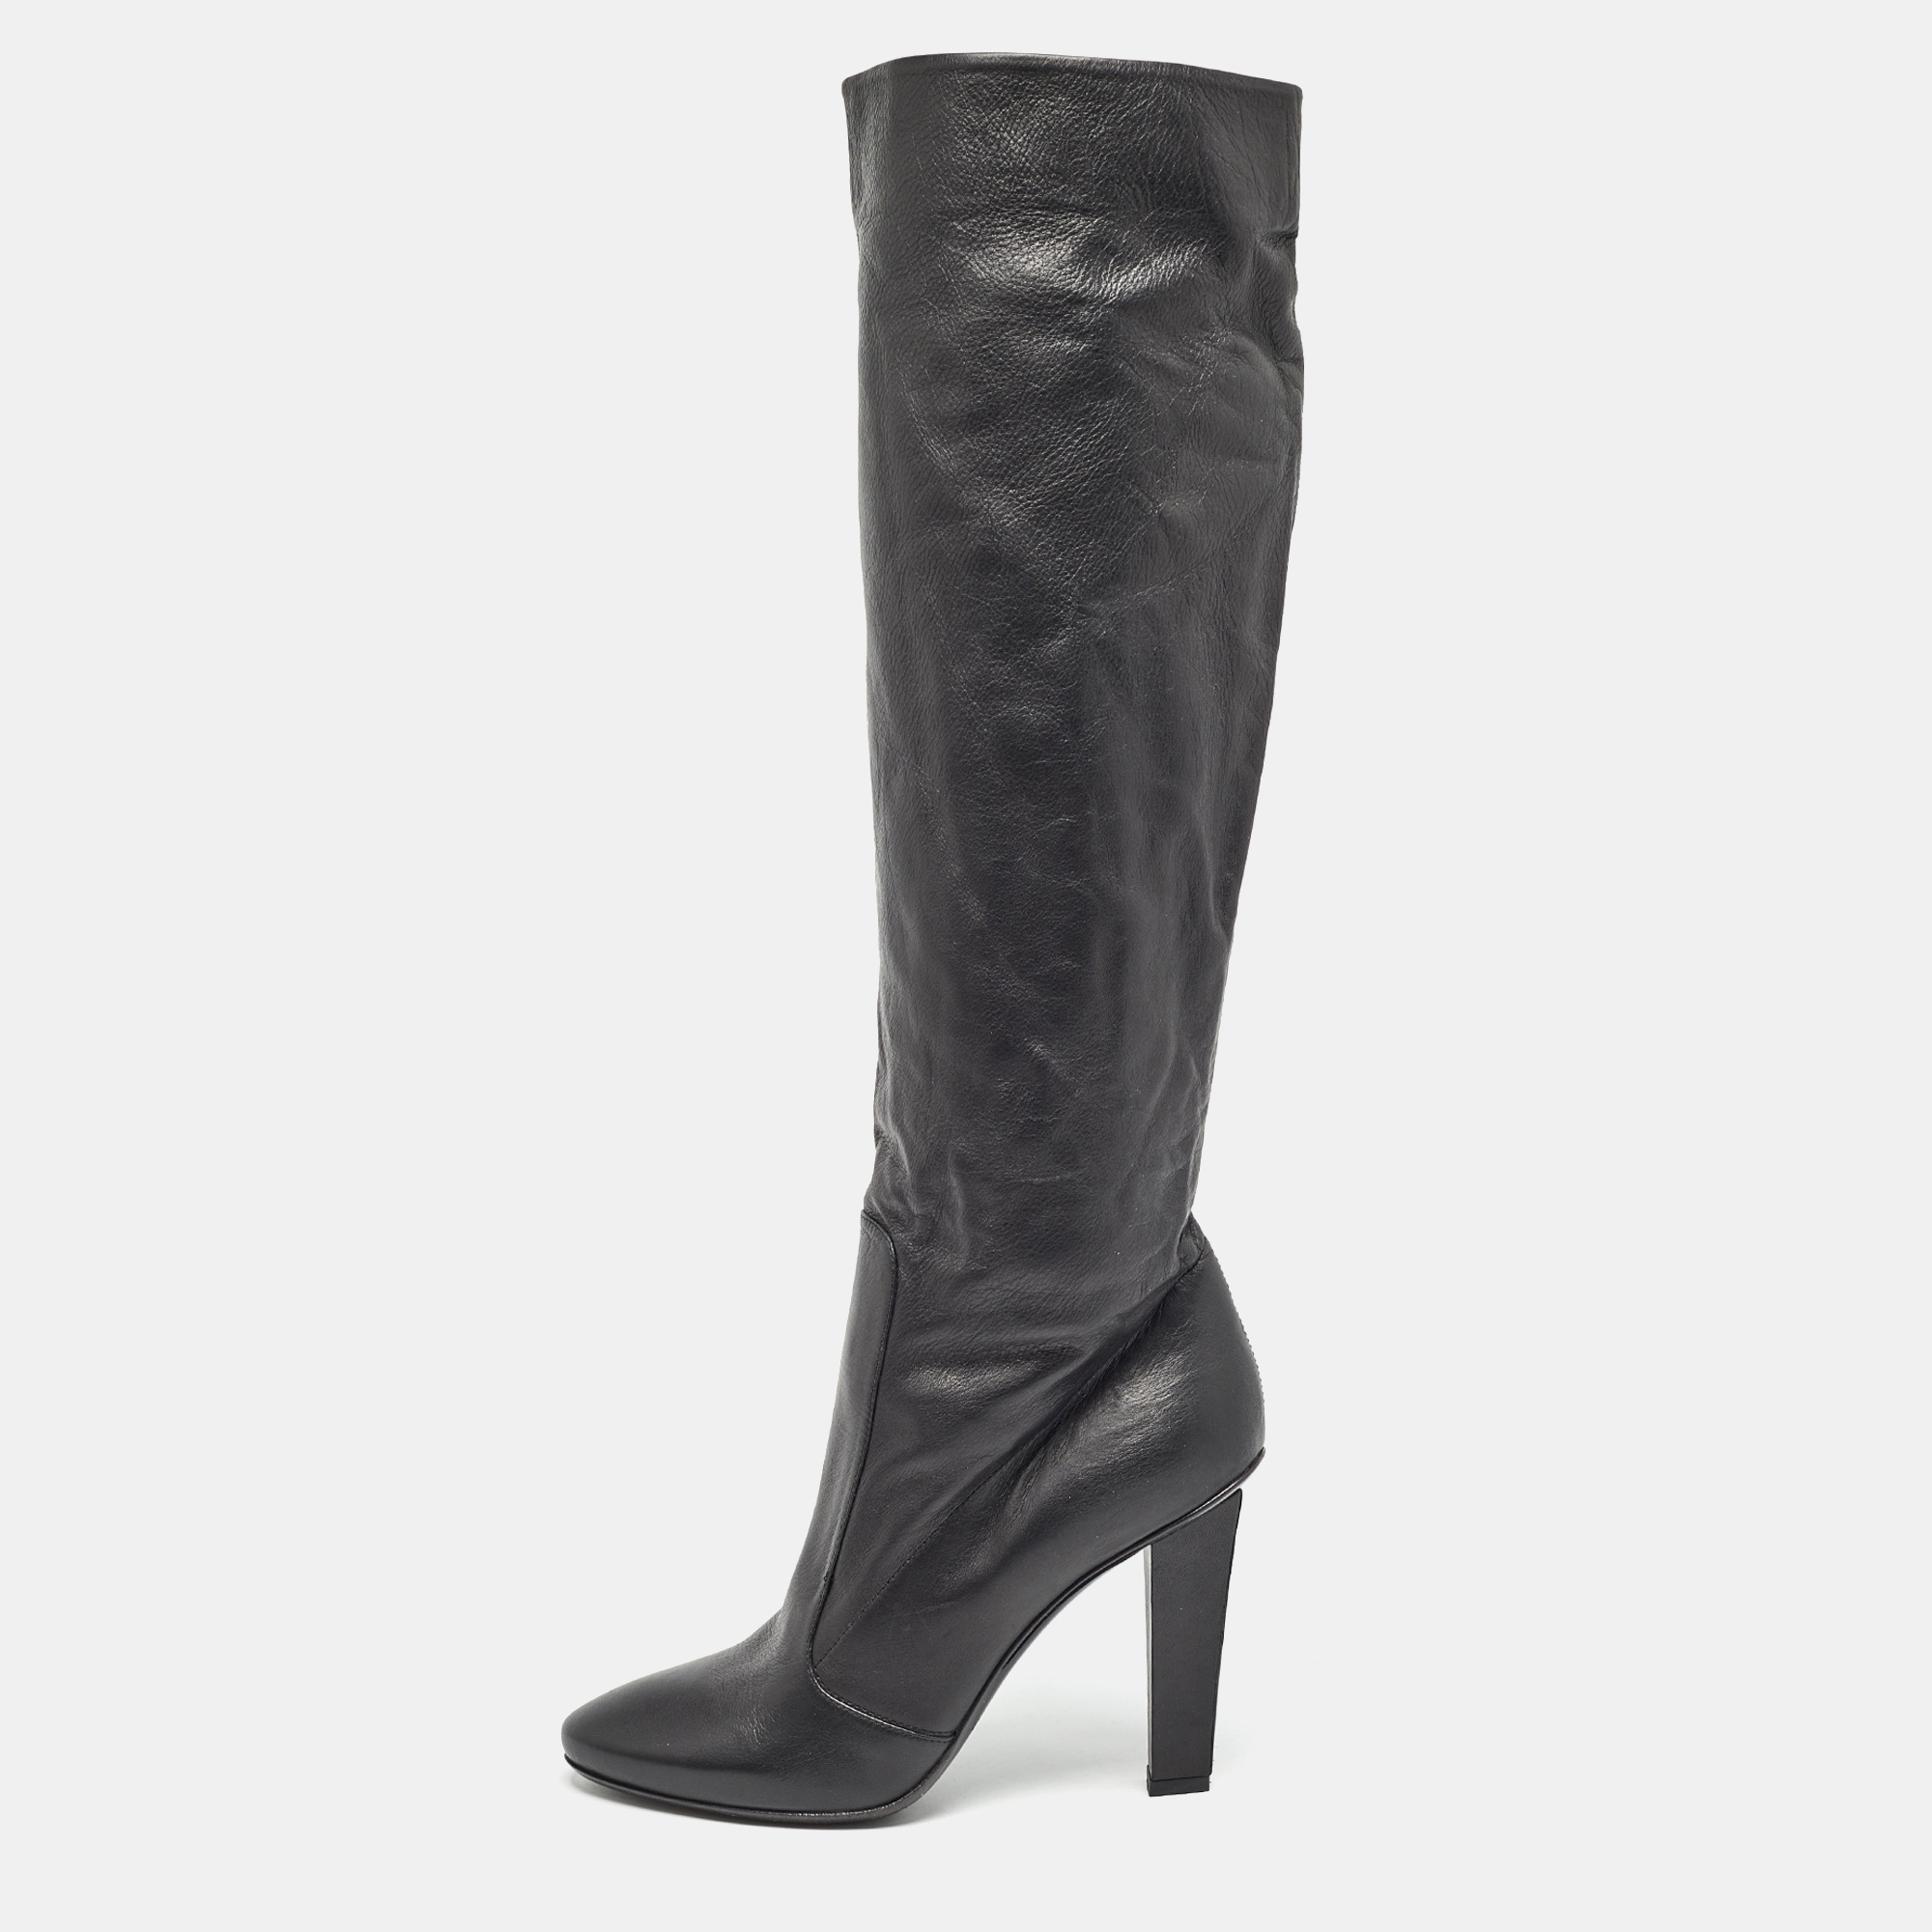 Jimmy choo black leather knee length boots size 37